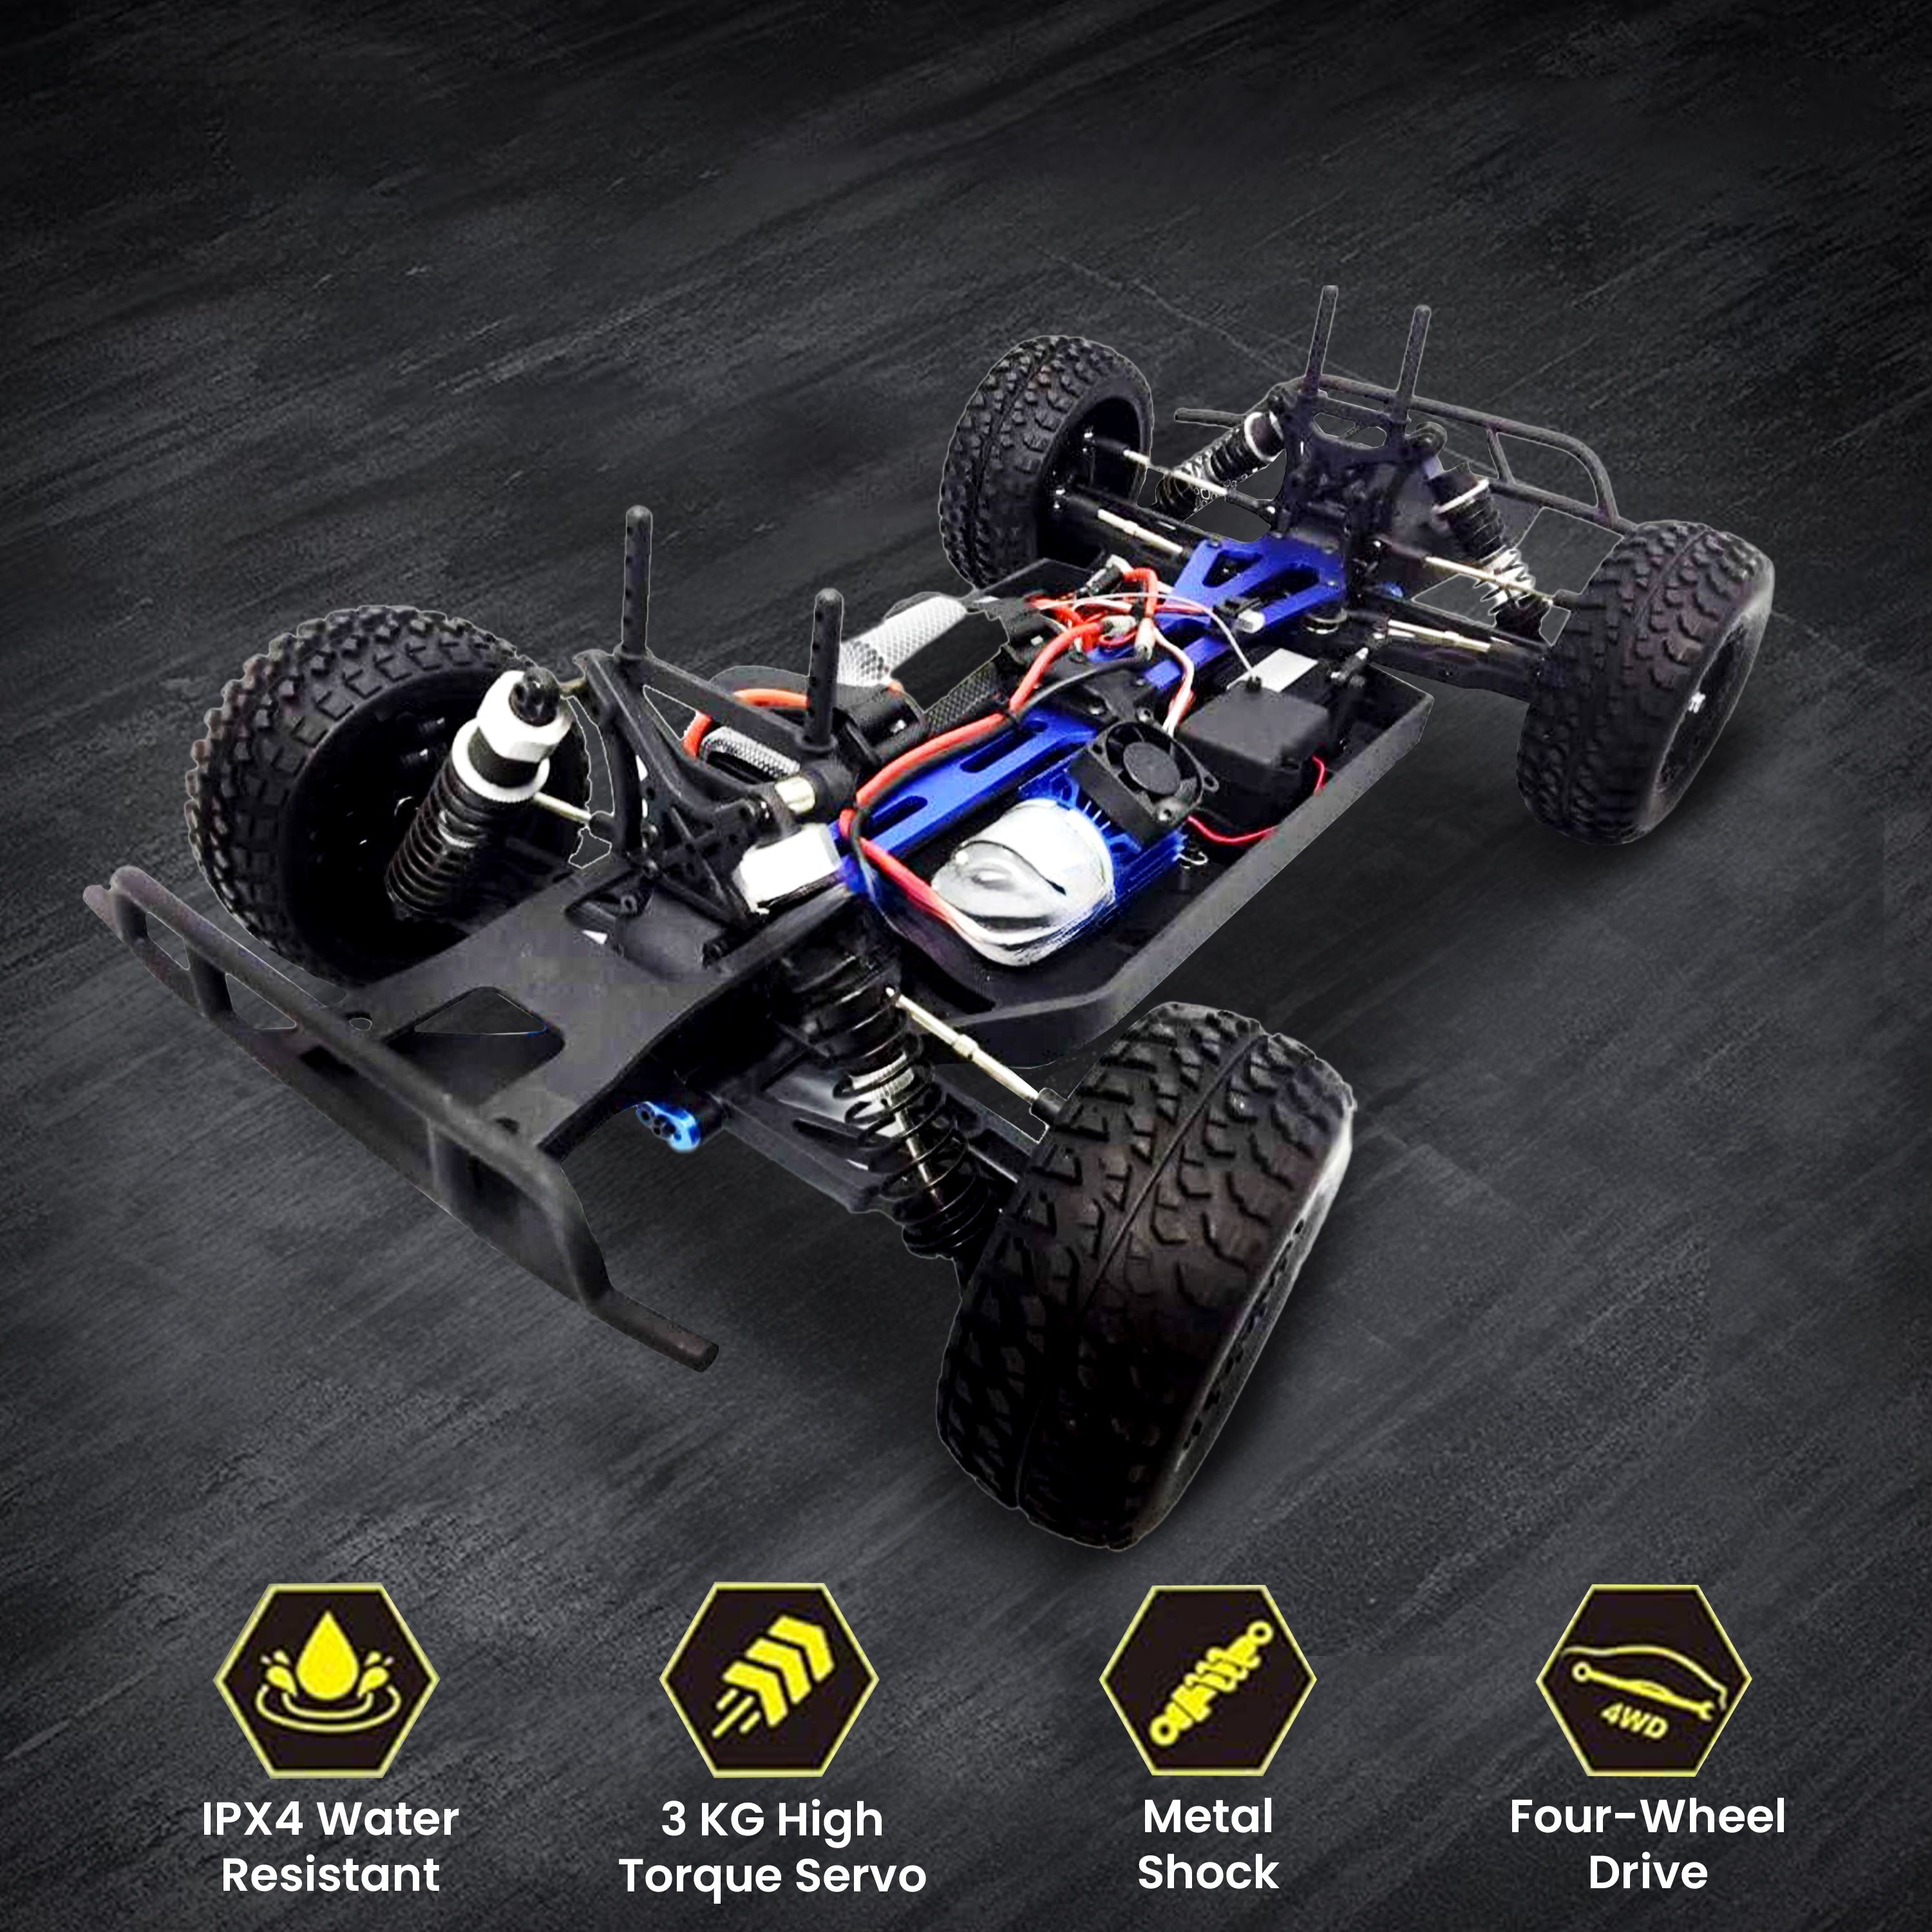 Tygatec Blast 1:8 Scale RC Monster Truggy Truck